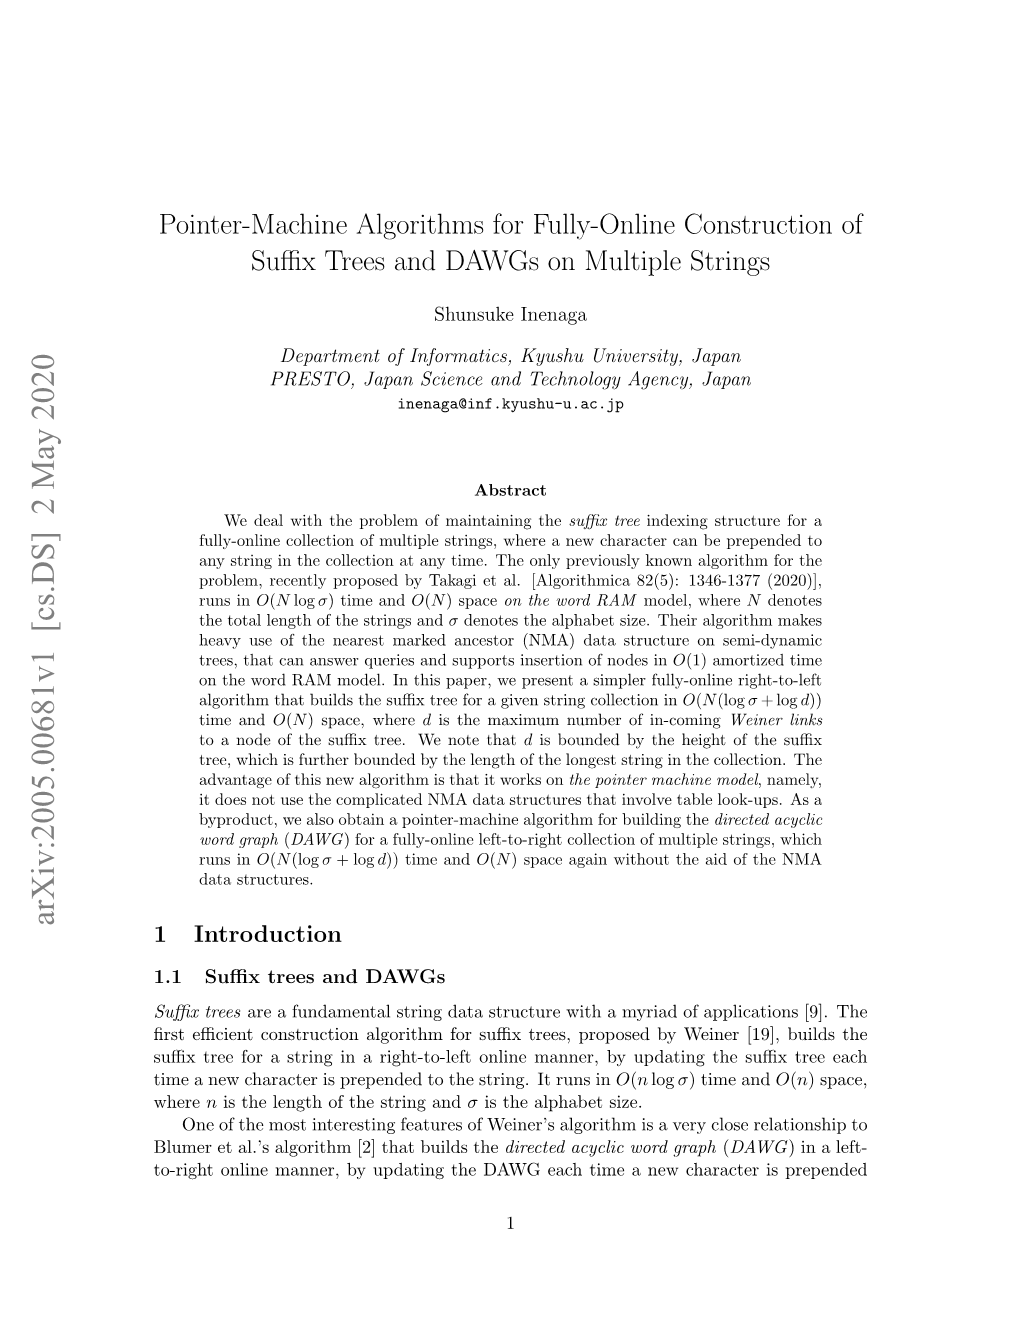 Pointer-Machine Algorithms for Fully-Online Construction of Suffix